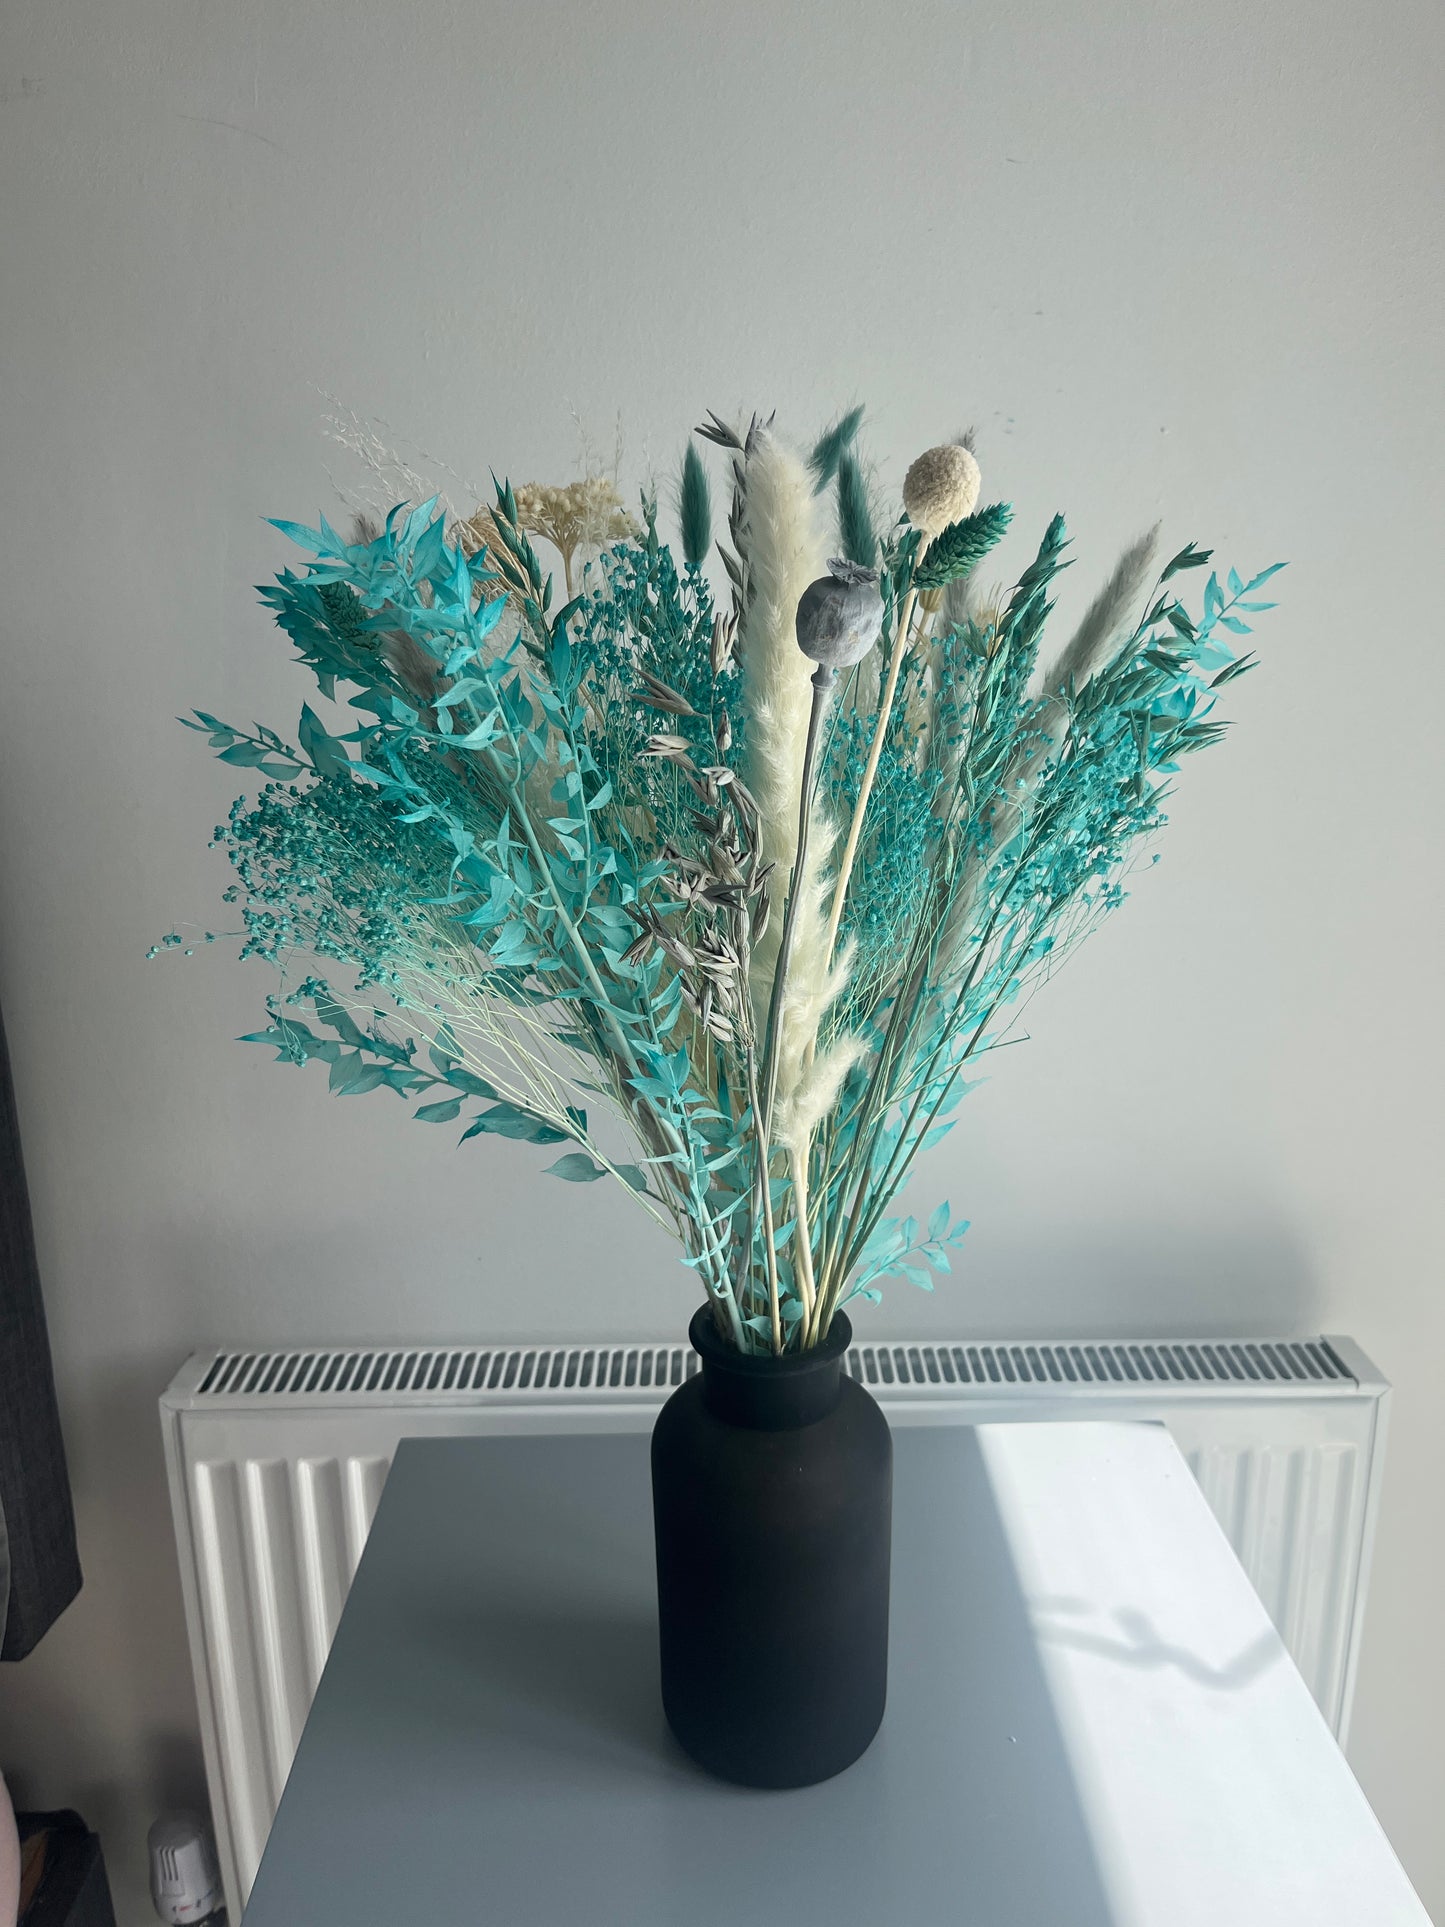 50-55cm Length Bespoke Dried Flowers Created For You